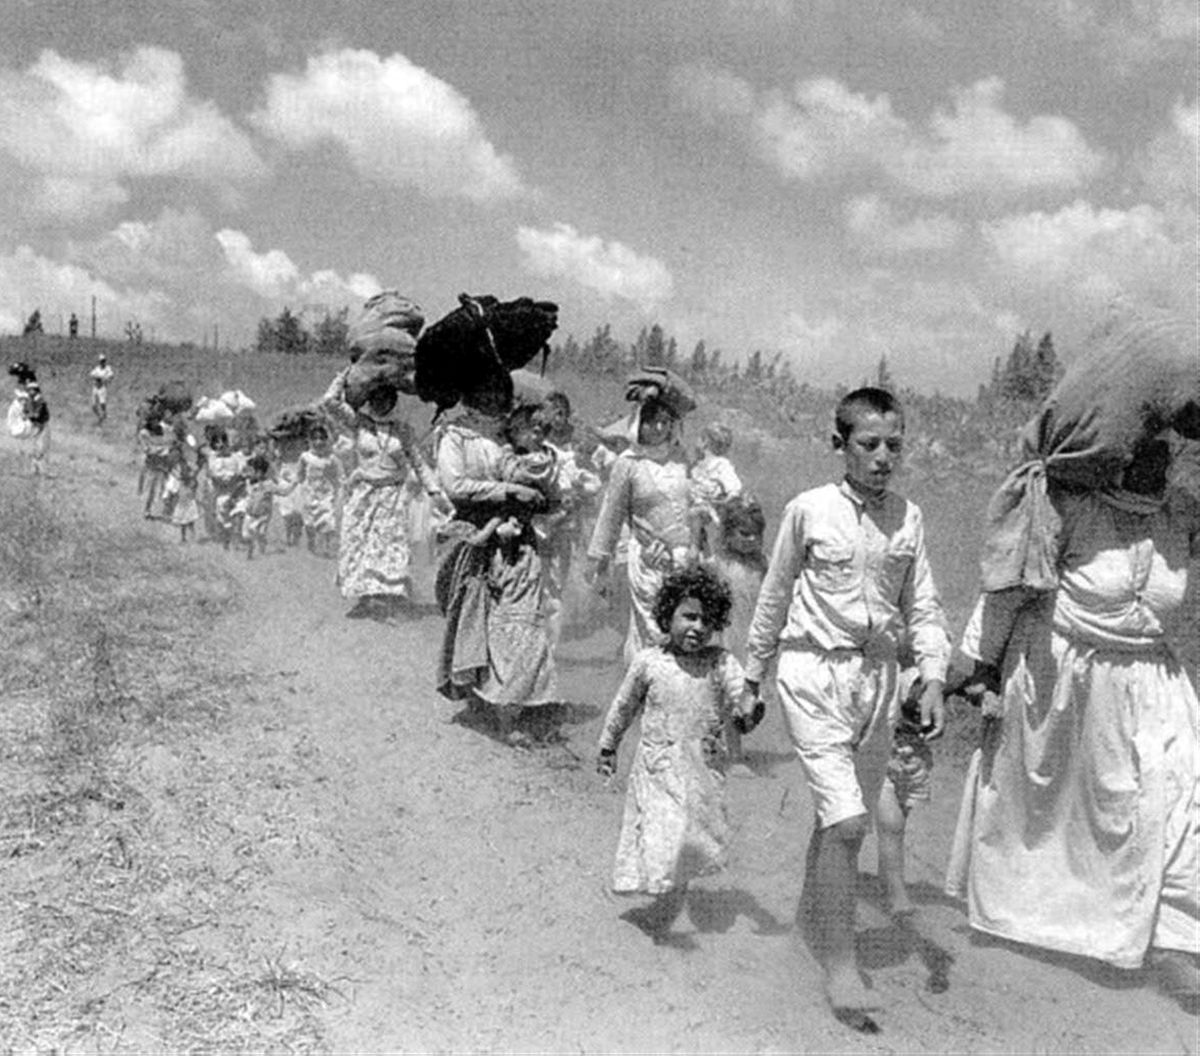 Women and children dressed in white, some carrying bundles on their heads, walk in a long line down a sandy road. 